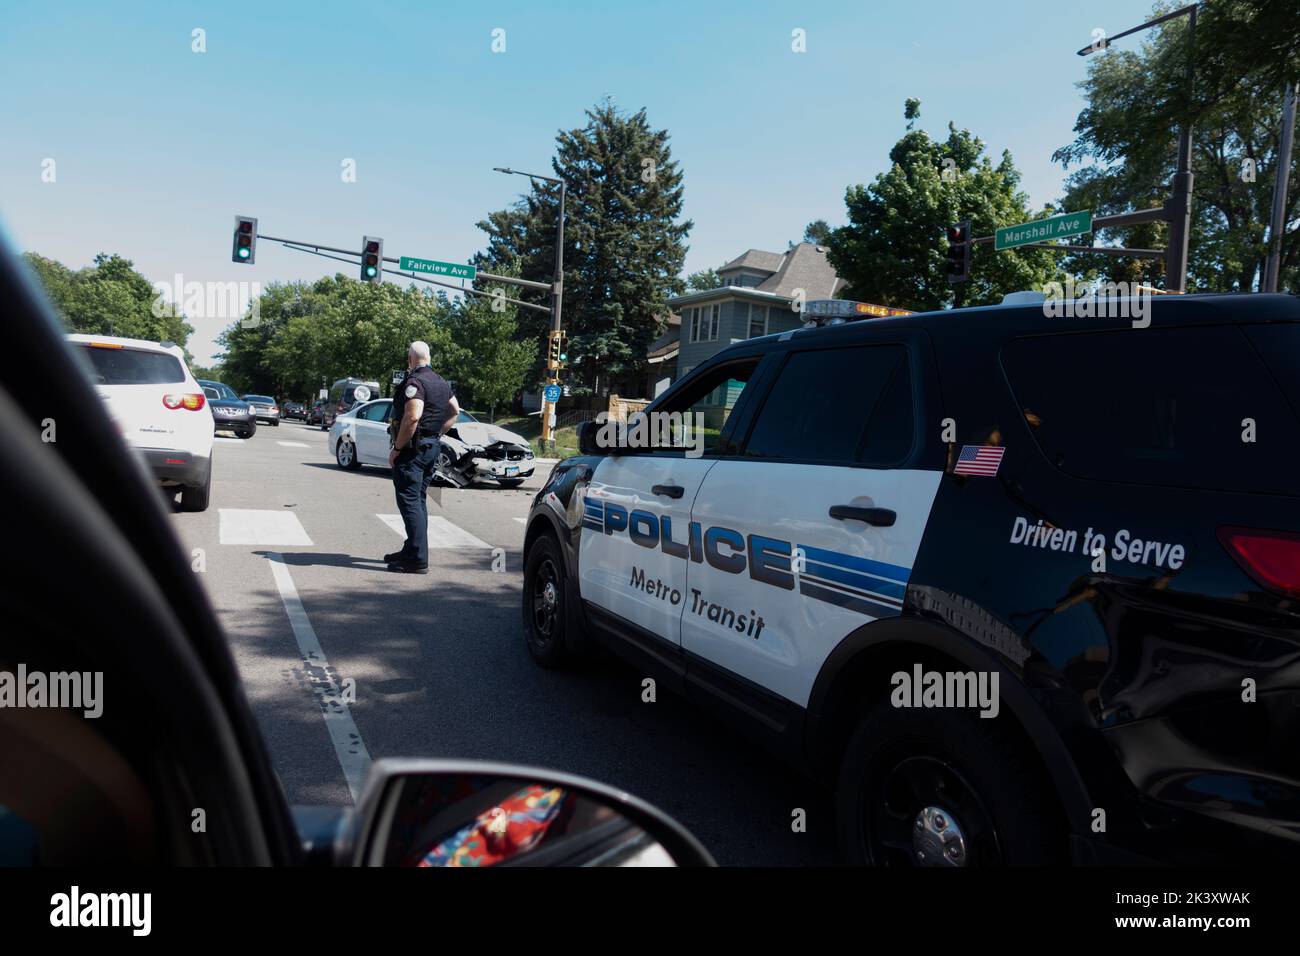 Policeman present at a car accident directing traffic. St Paul Minnesota MN USA Stock Photo